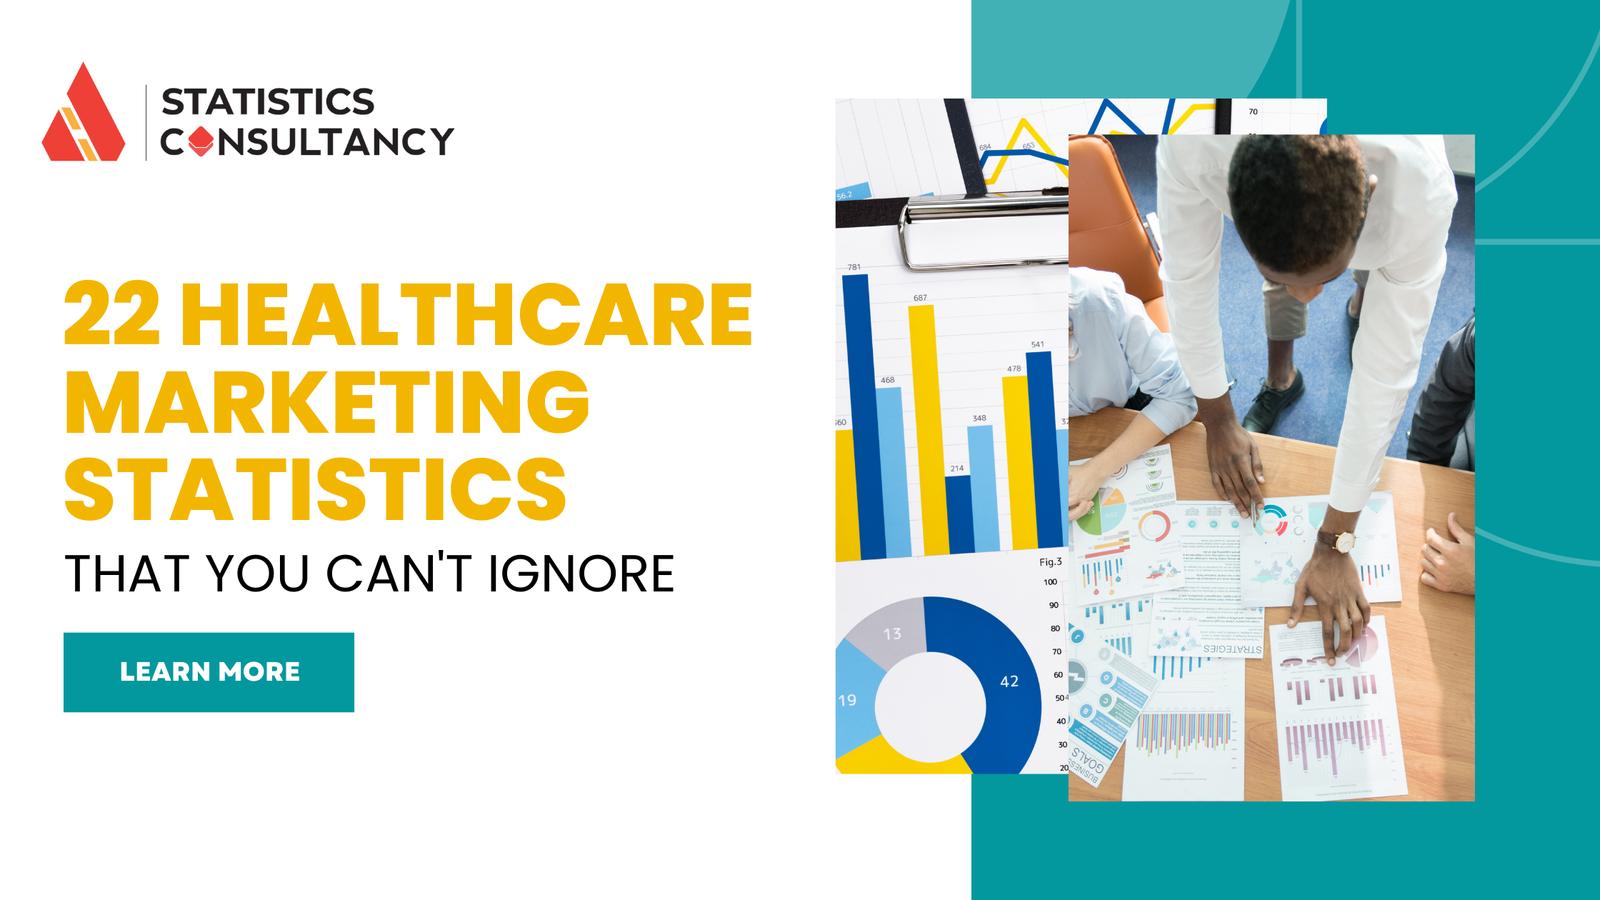 22 Healthcare Marketing Statistics that You Can't Ignore